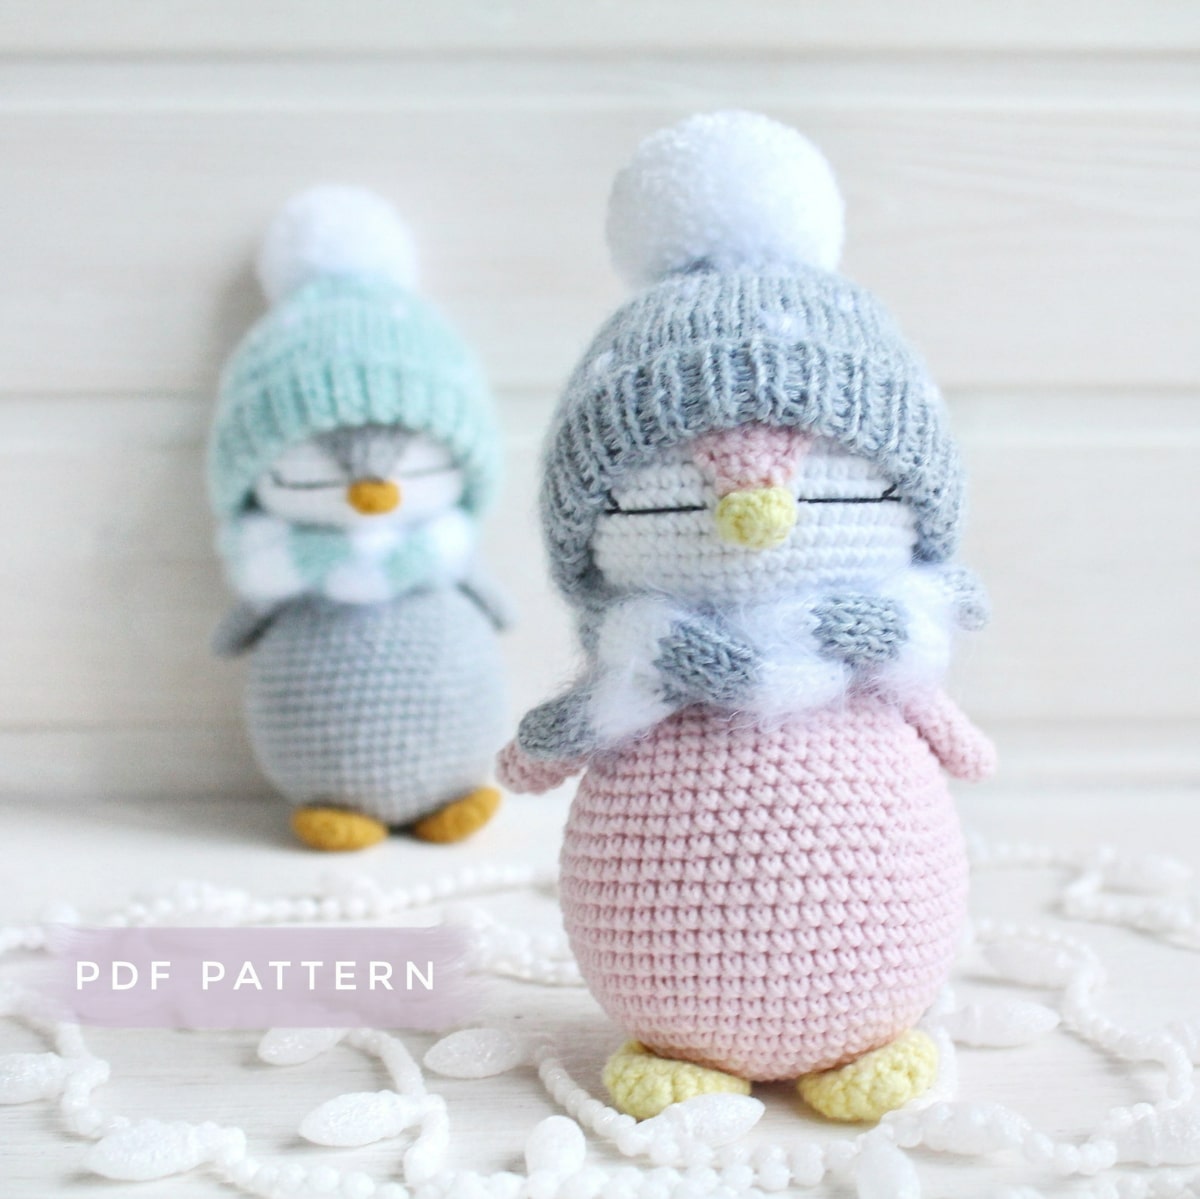 Crochet penguin with a pale pink body and white face wearing a gray bobble hat and gray and white scarf with a smaller penguin in the distance wearing a blue hat.